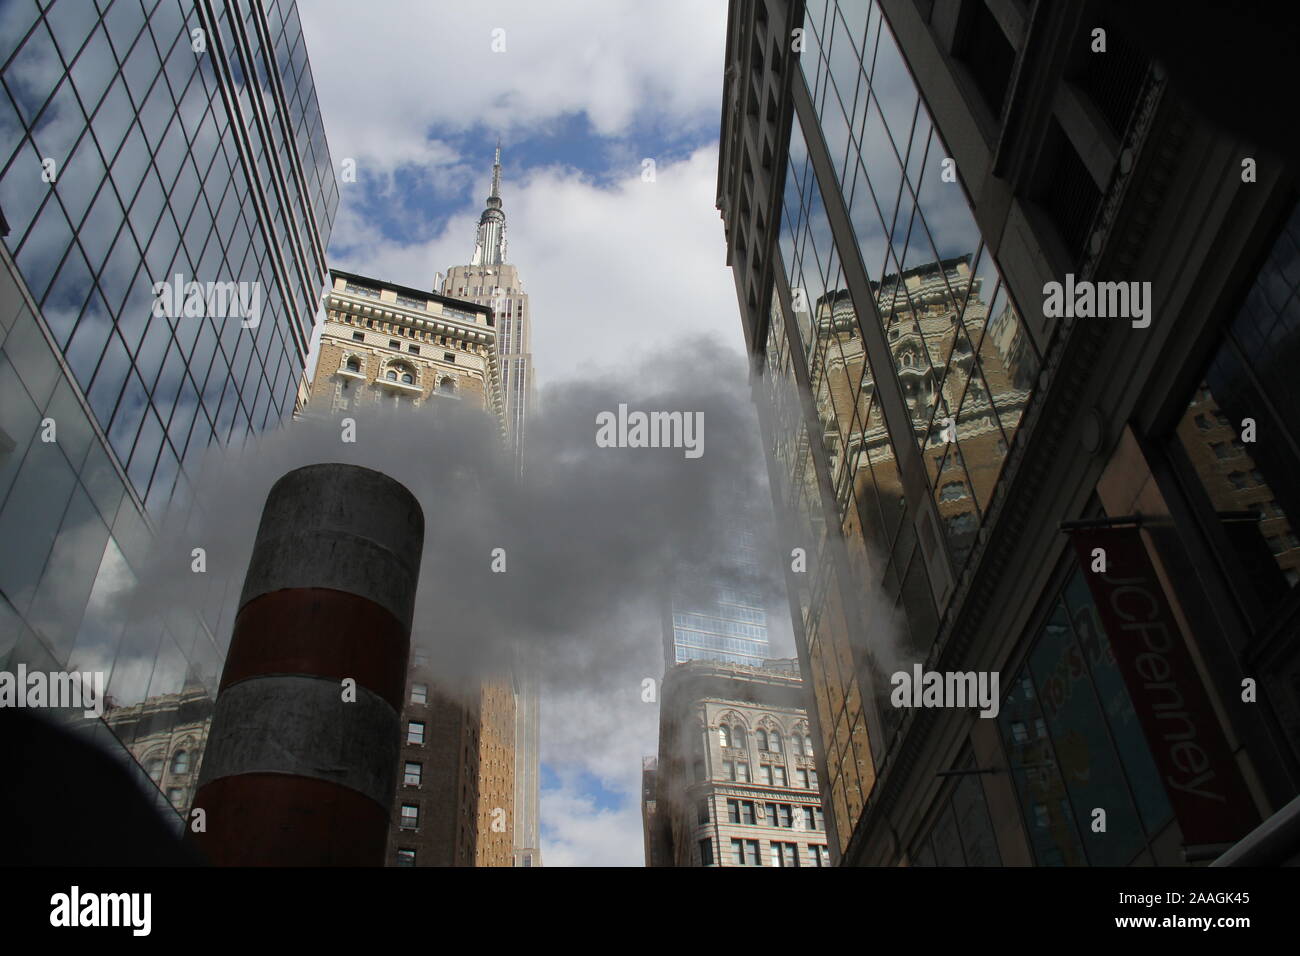 Subway steam clouds rising between Manhattan skyscrapers, towards the Empire State Building against blue sky with white clouds Stock Photo